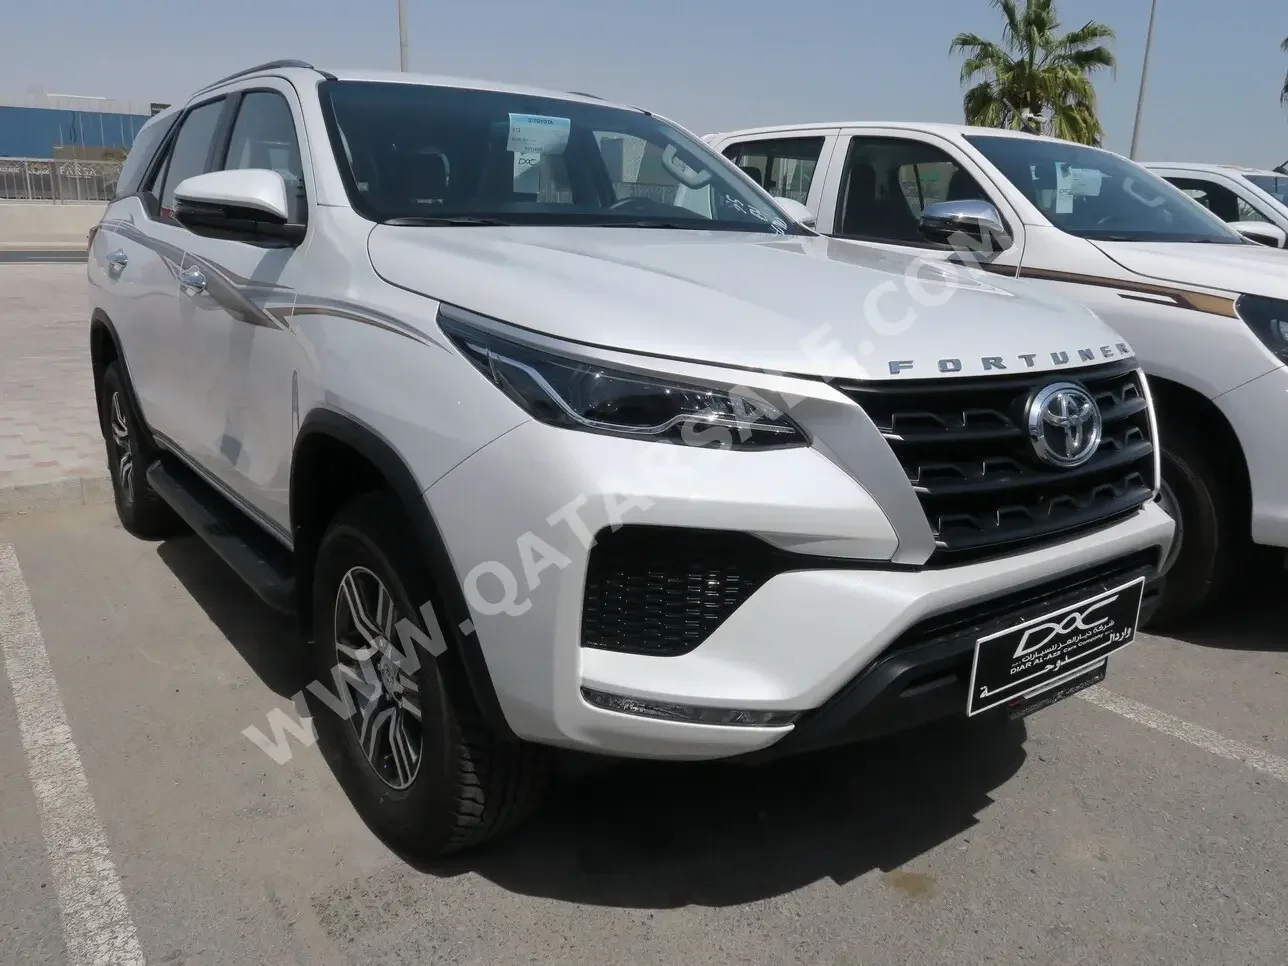 Toyota  Fortuner  2024  Automatic  0 Km  4 Cylinder  Four Wheel Drive (4WD)  SUV  White  With Warranty